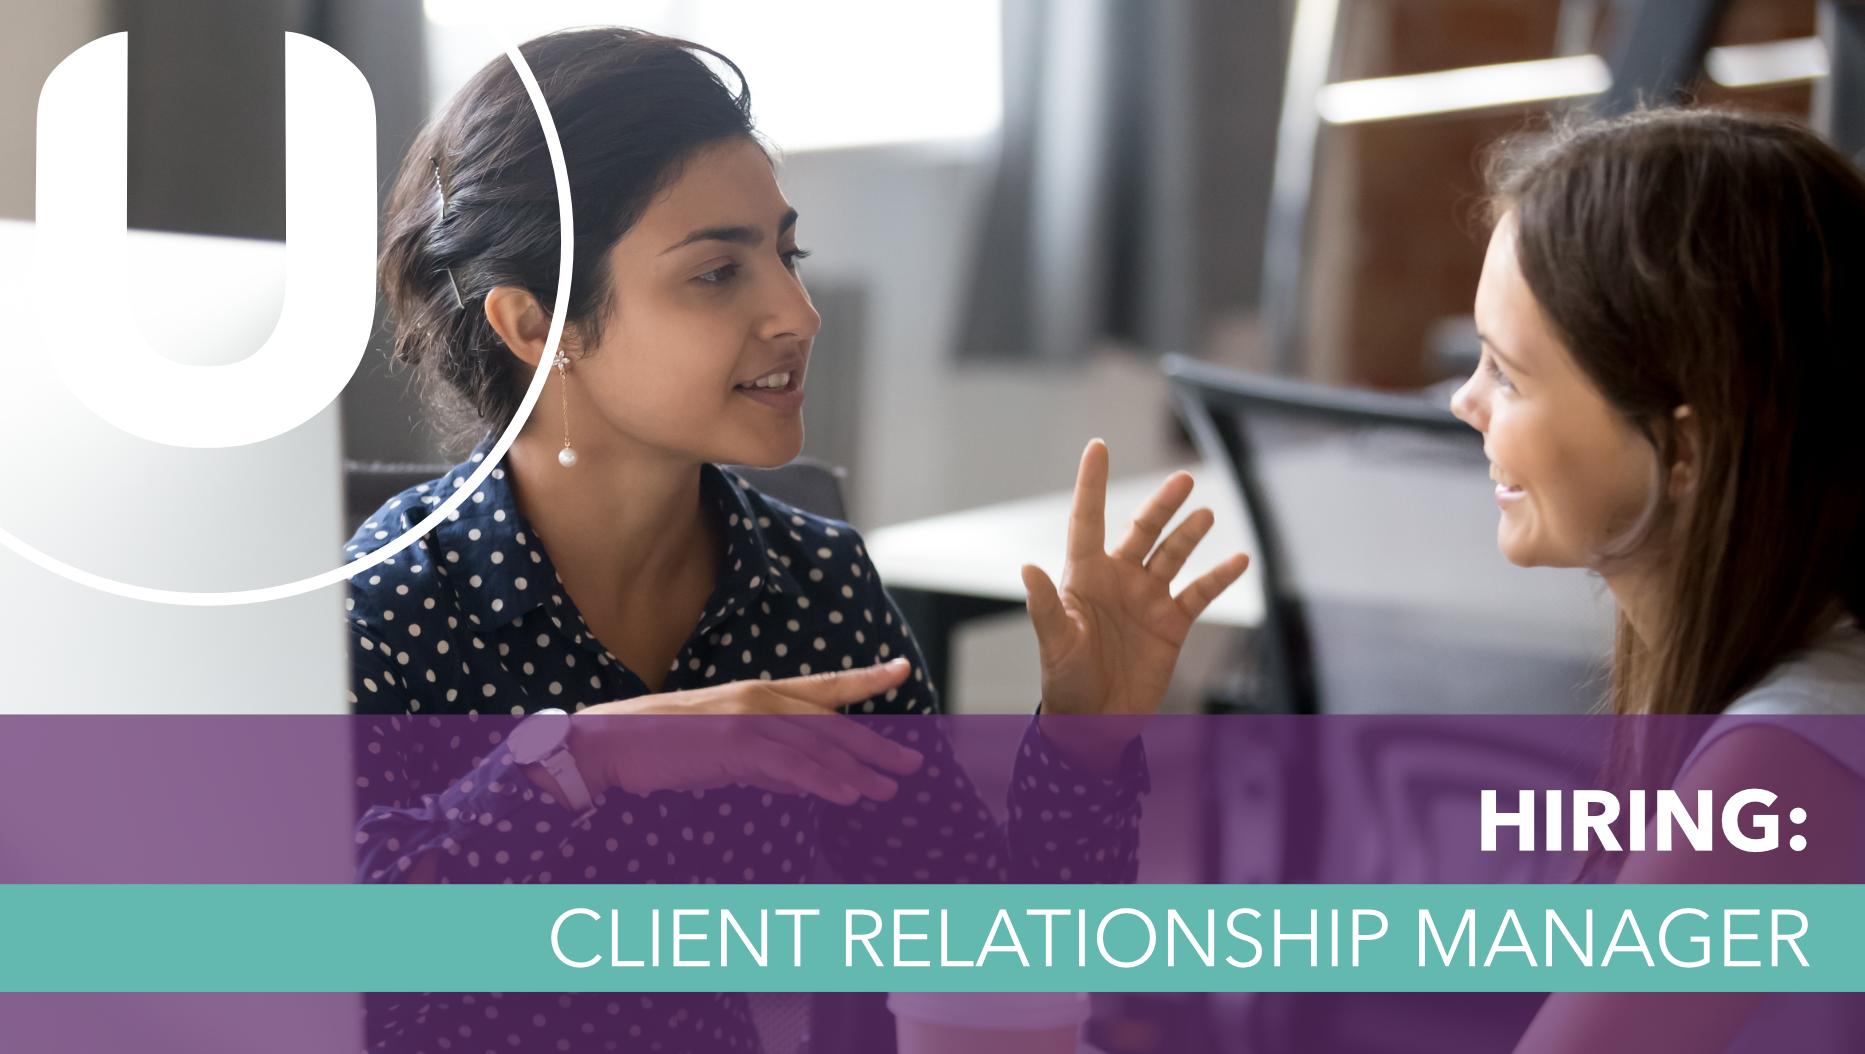 Hiring: Client Relationship Manager - AD CLOSED